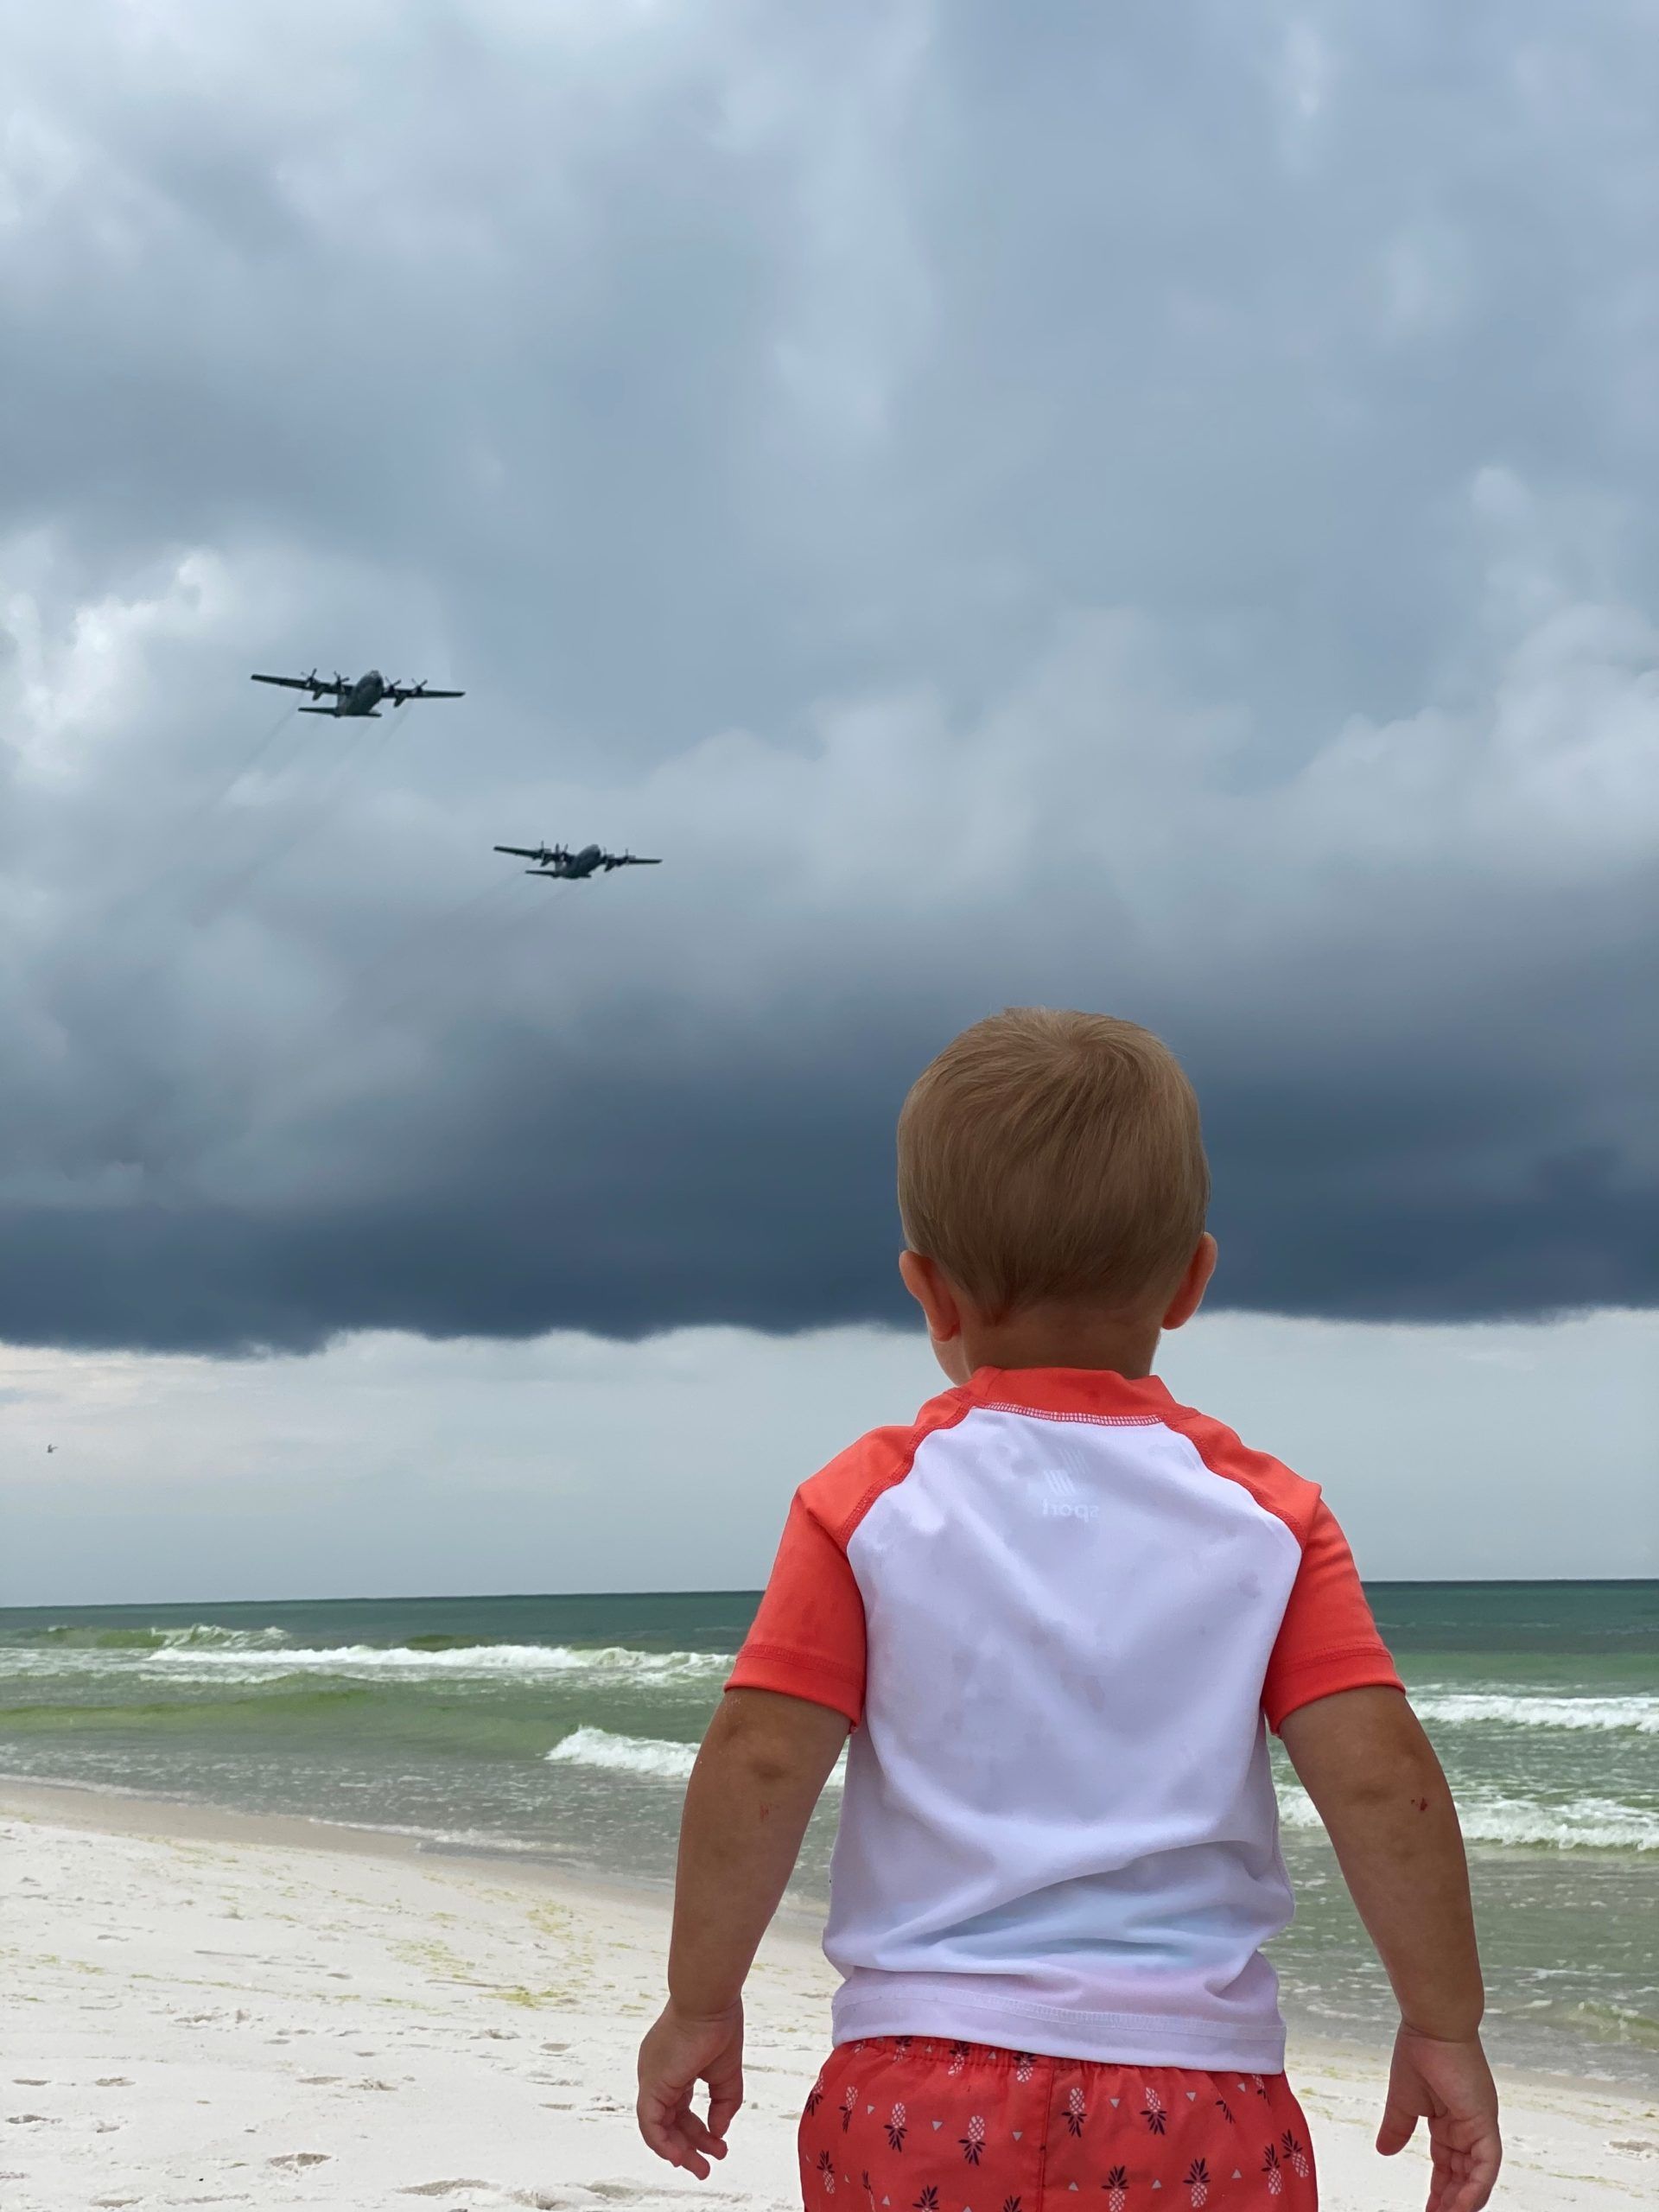 Cash watching as the planes fly over Navarre beach. Photo taken by Dean Bourgeois